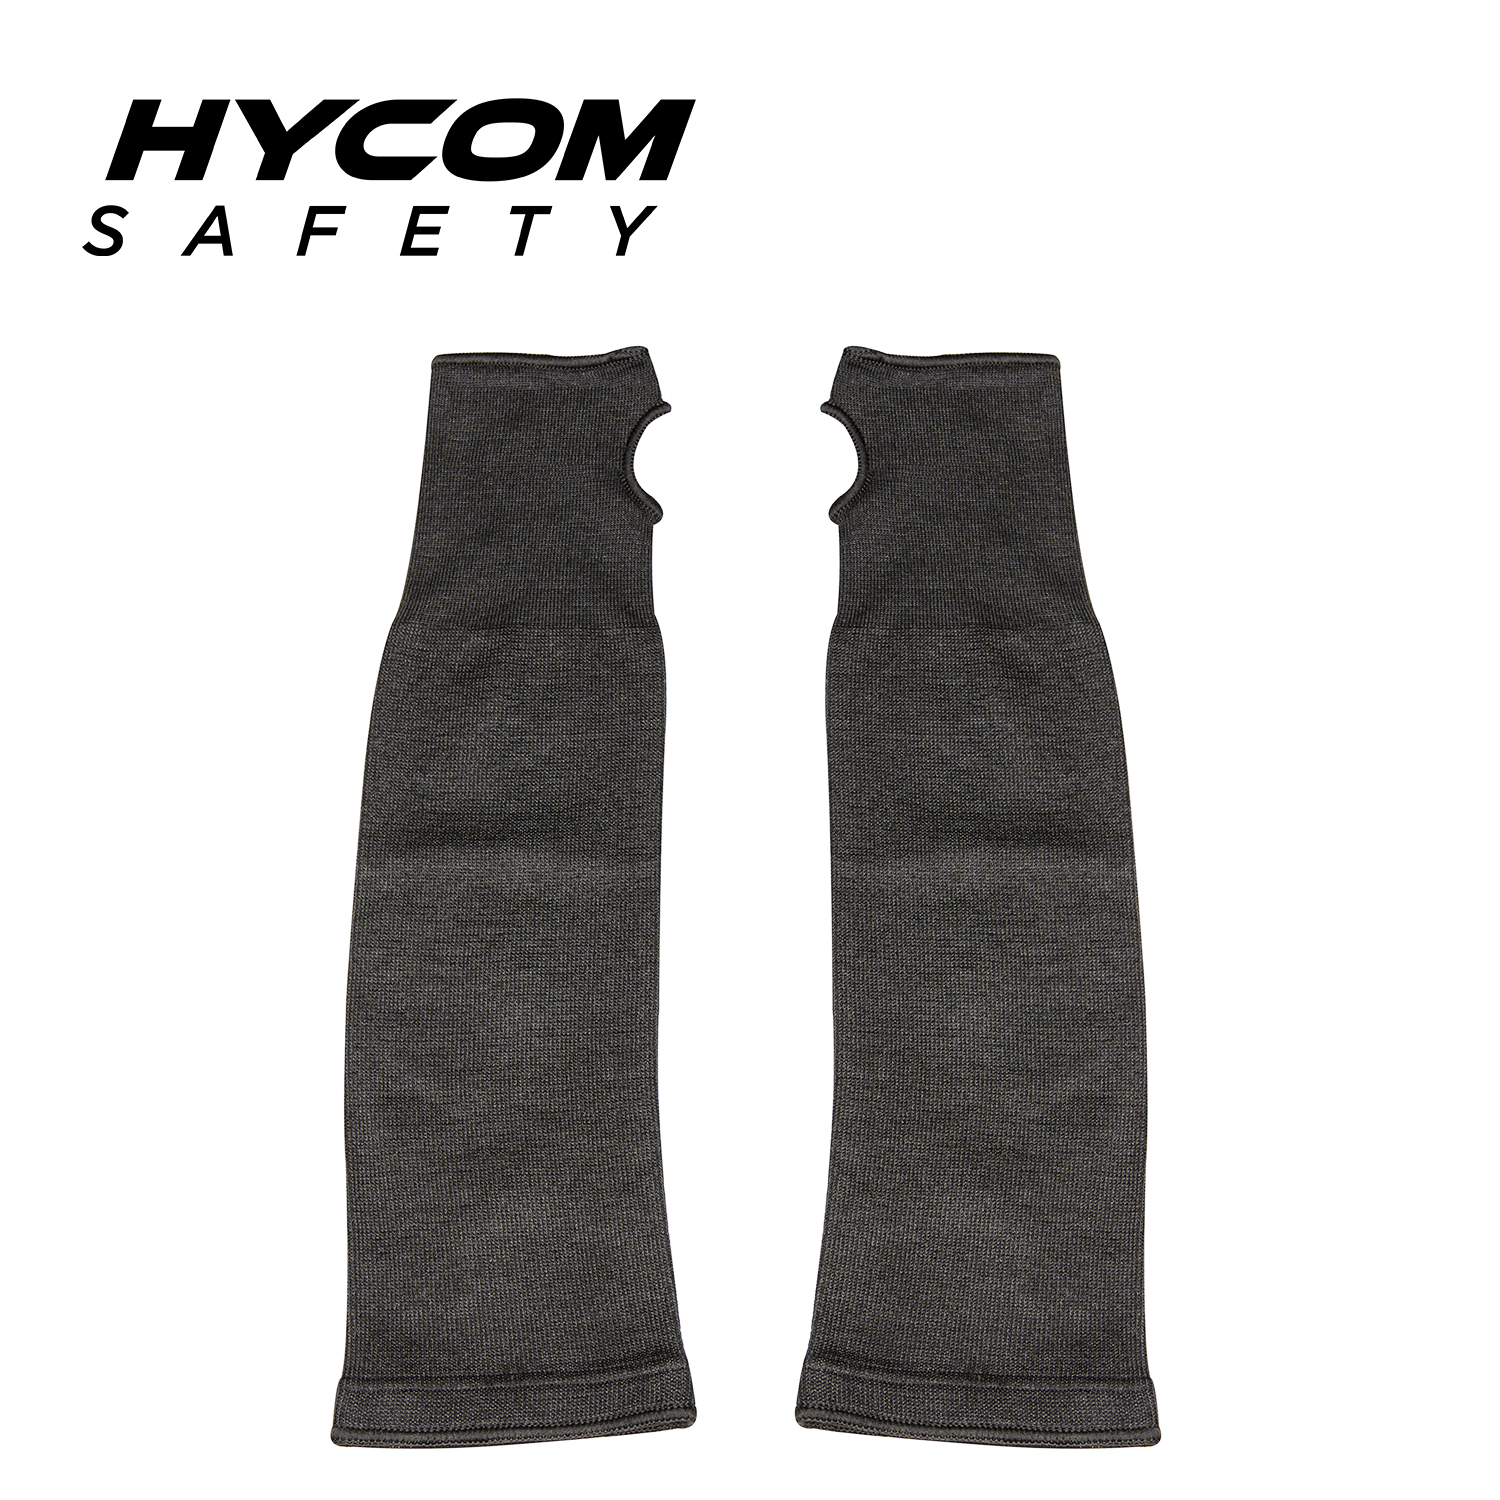 HYCOM Cut Level 3 Cut Resistant Arm Cover Sleeve with Thumb Slot For Work Safety